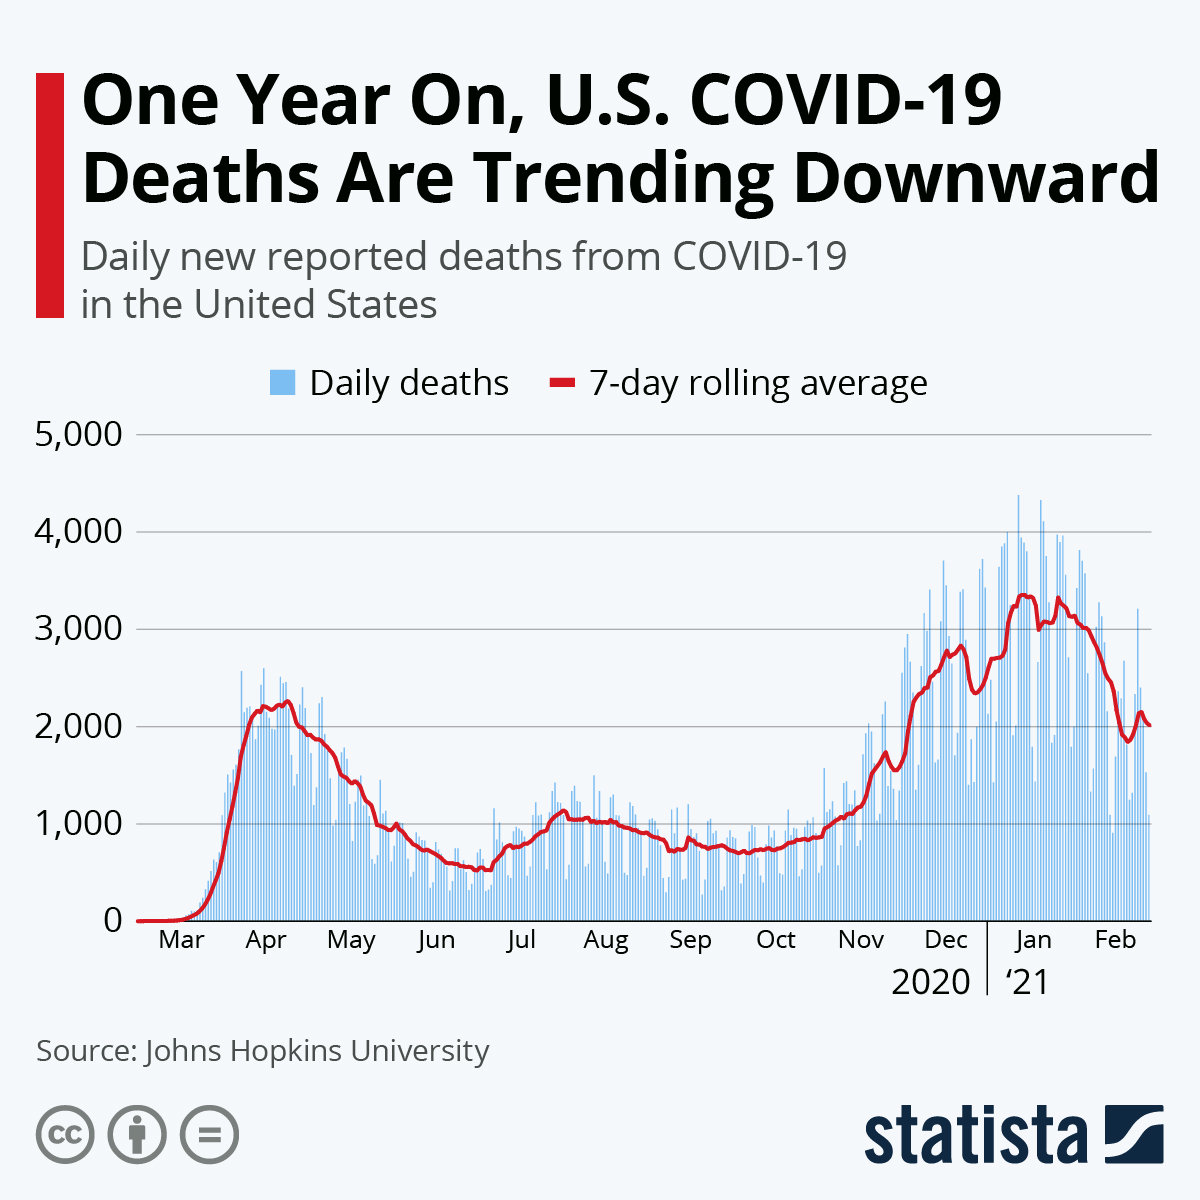 One Year On, U.S. COVID-19 Deaths Are Trending Downward